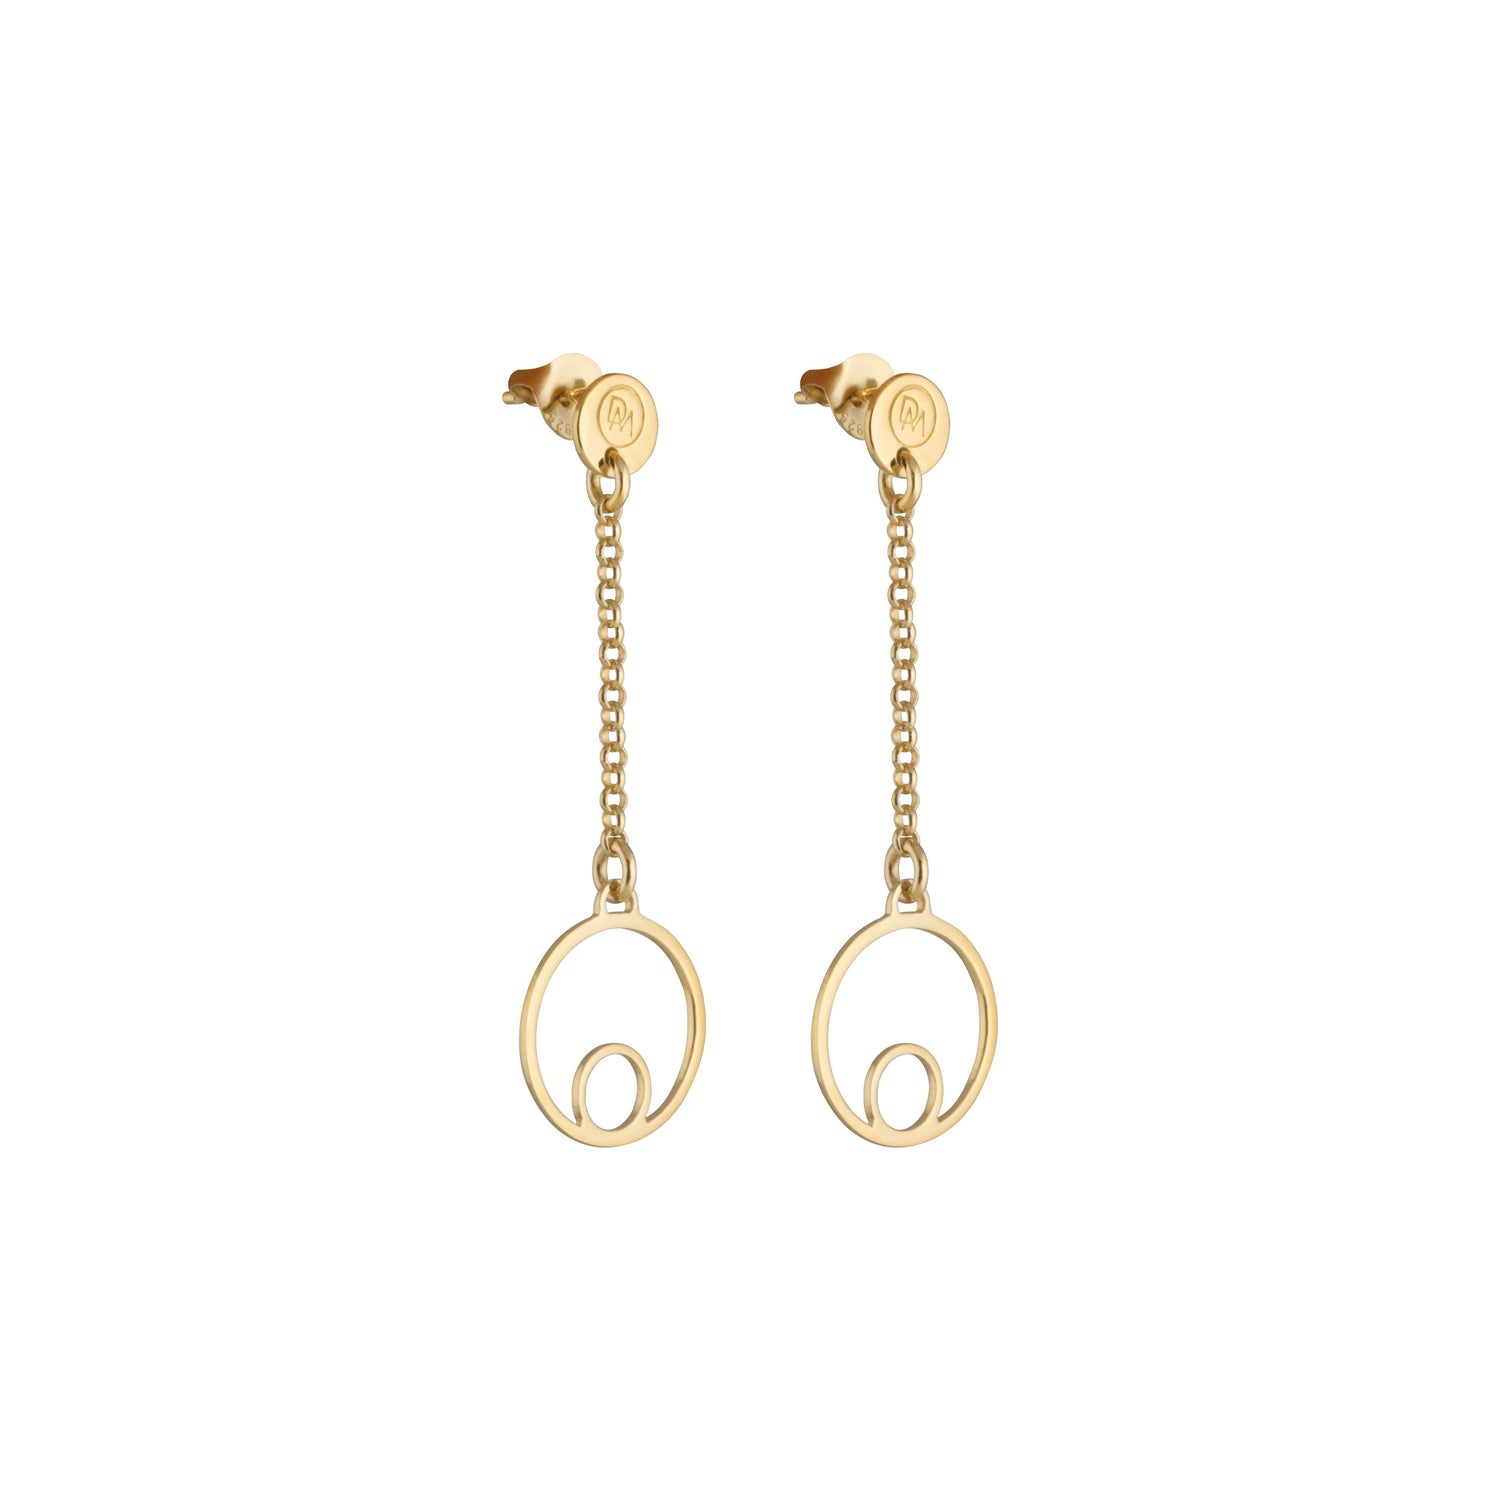 Gentle earrings with circle-shaped pendants from iconic Circles collection. Designed in minimalist style, these earrings are lightweight and playful.   Combine them with Circles Necklace.   Material: 18 karat gold-plated silver.  Size: outer circles diameter is 10mm, the length of the earring is approximately 5cm. 